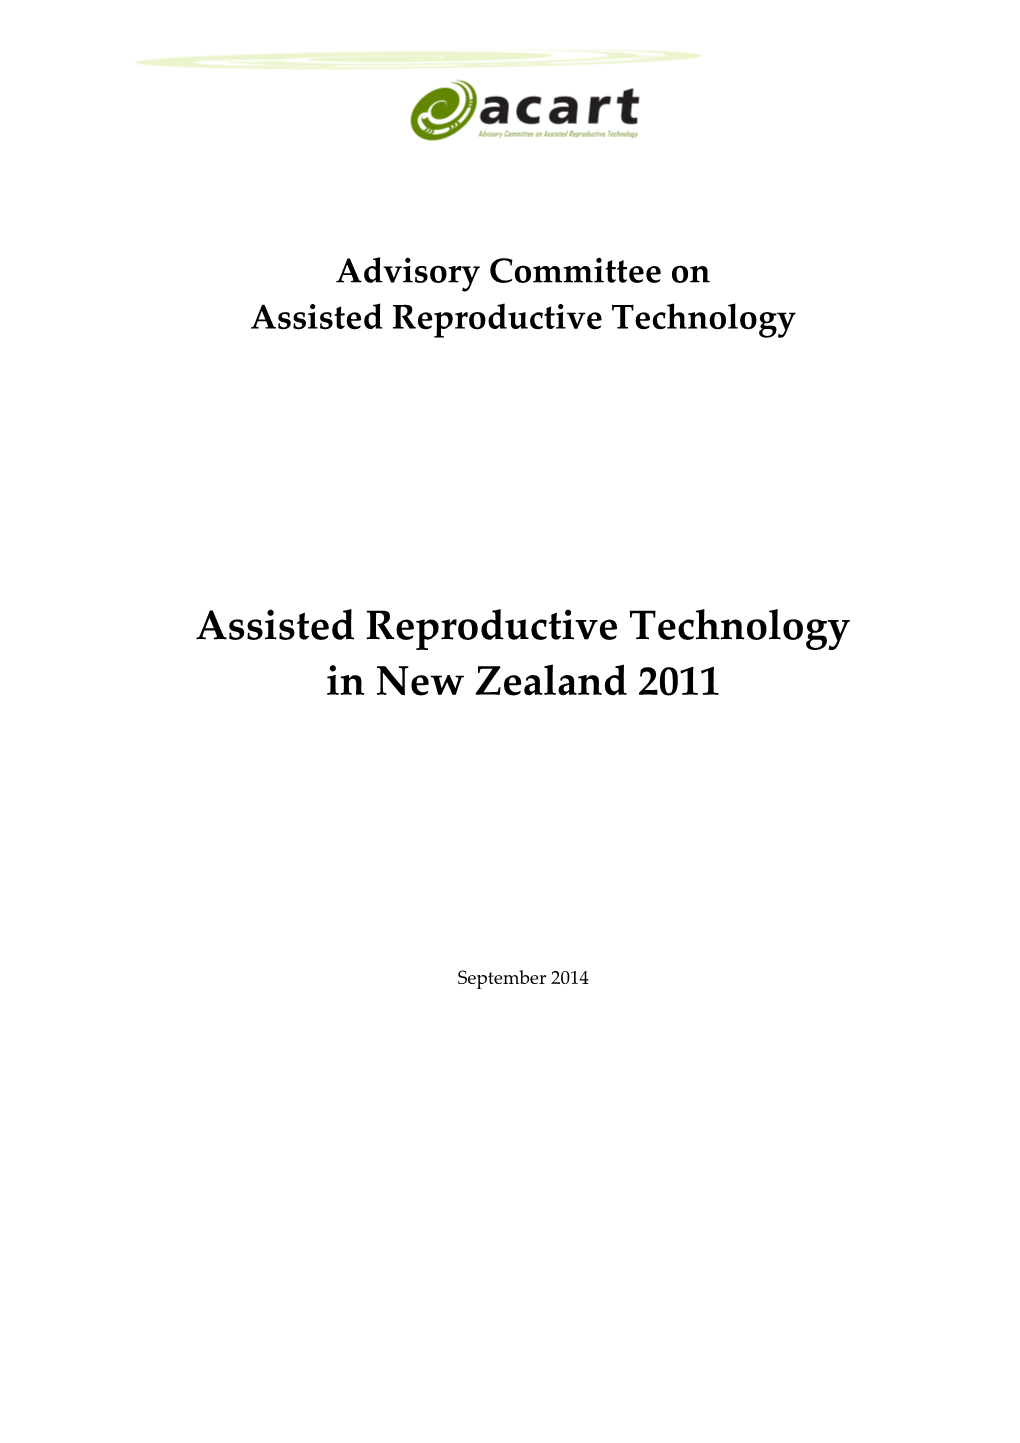 ACART Assisted Reproductive Technology in New Zealand 2011